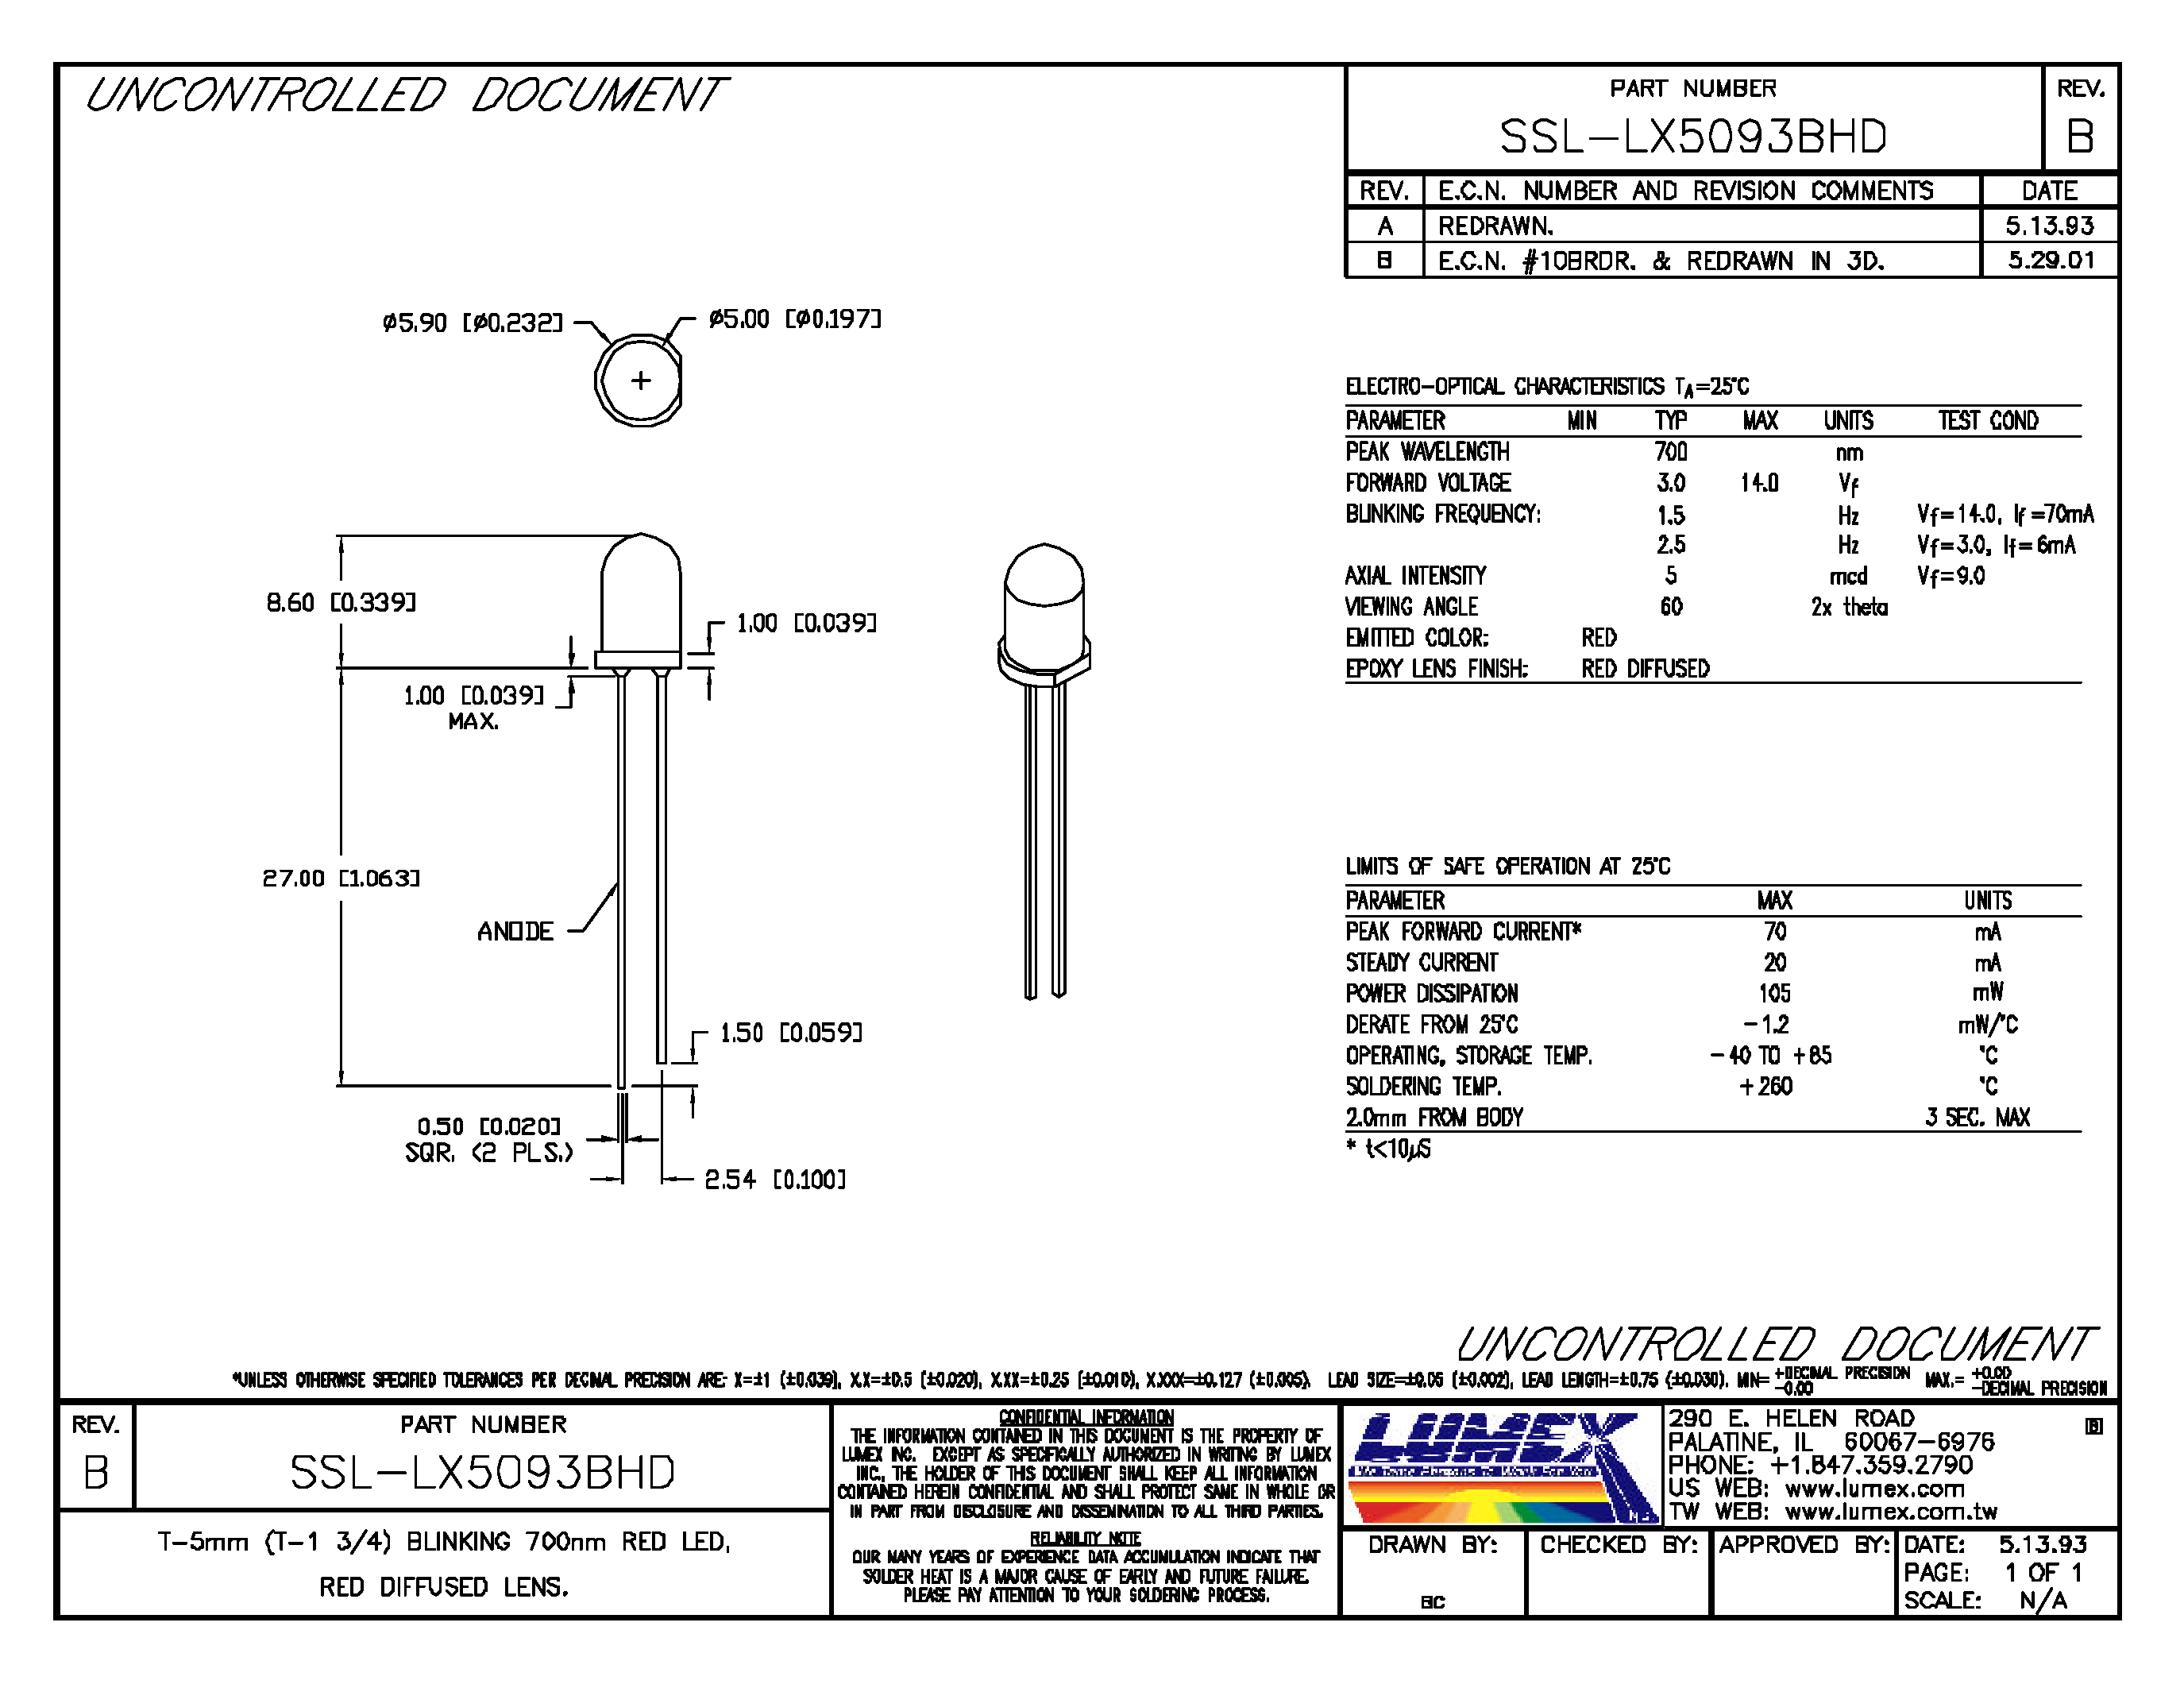 Datasheet SSL-LX5093BHD - T-5mm BUNKING 700mm RED LED RED DIFFUSED LENS page 1